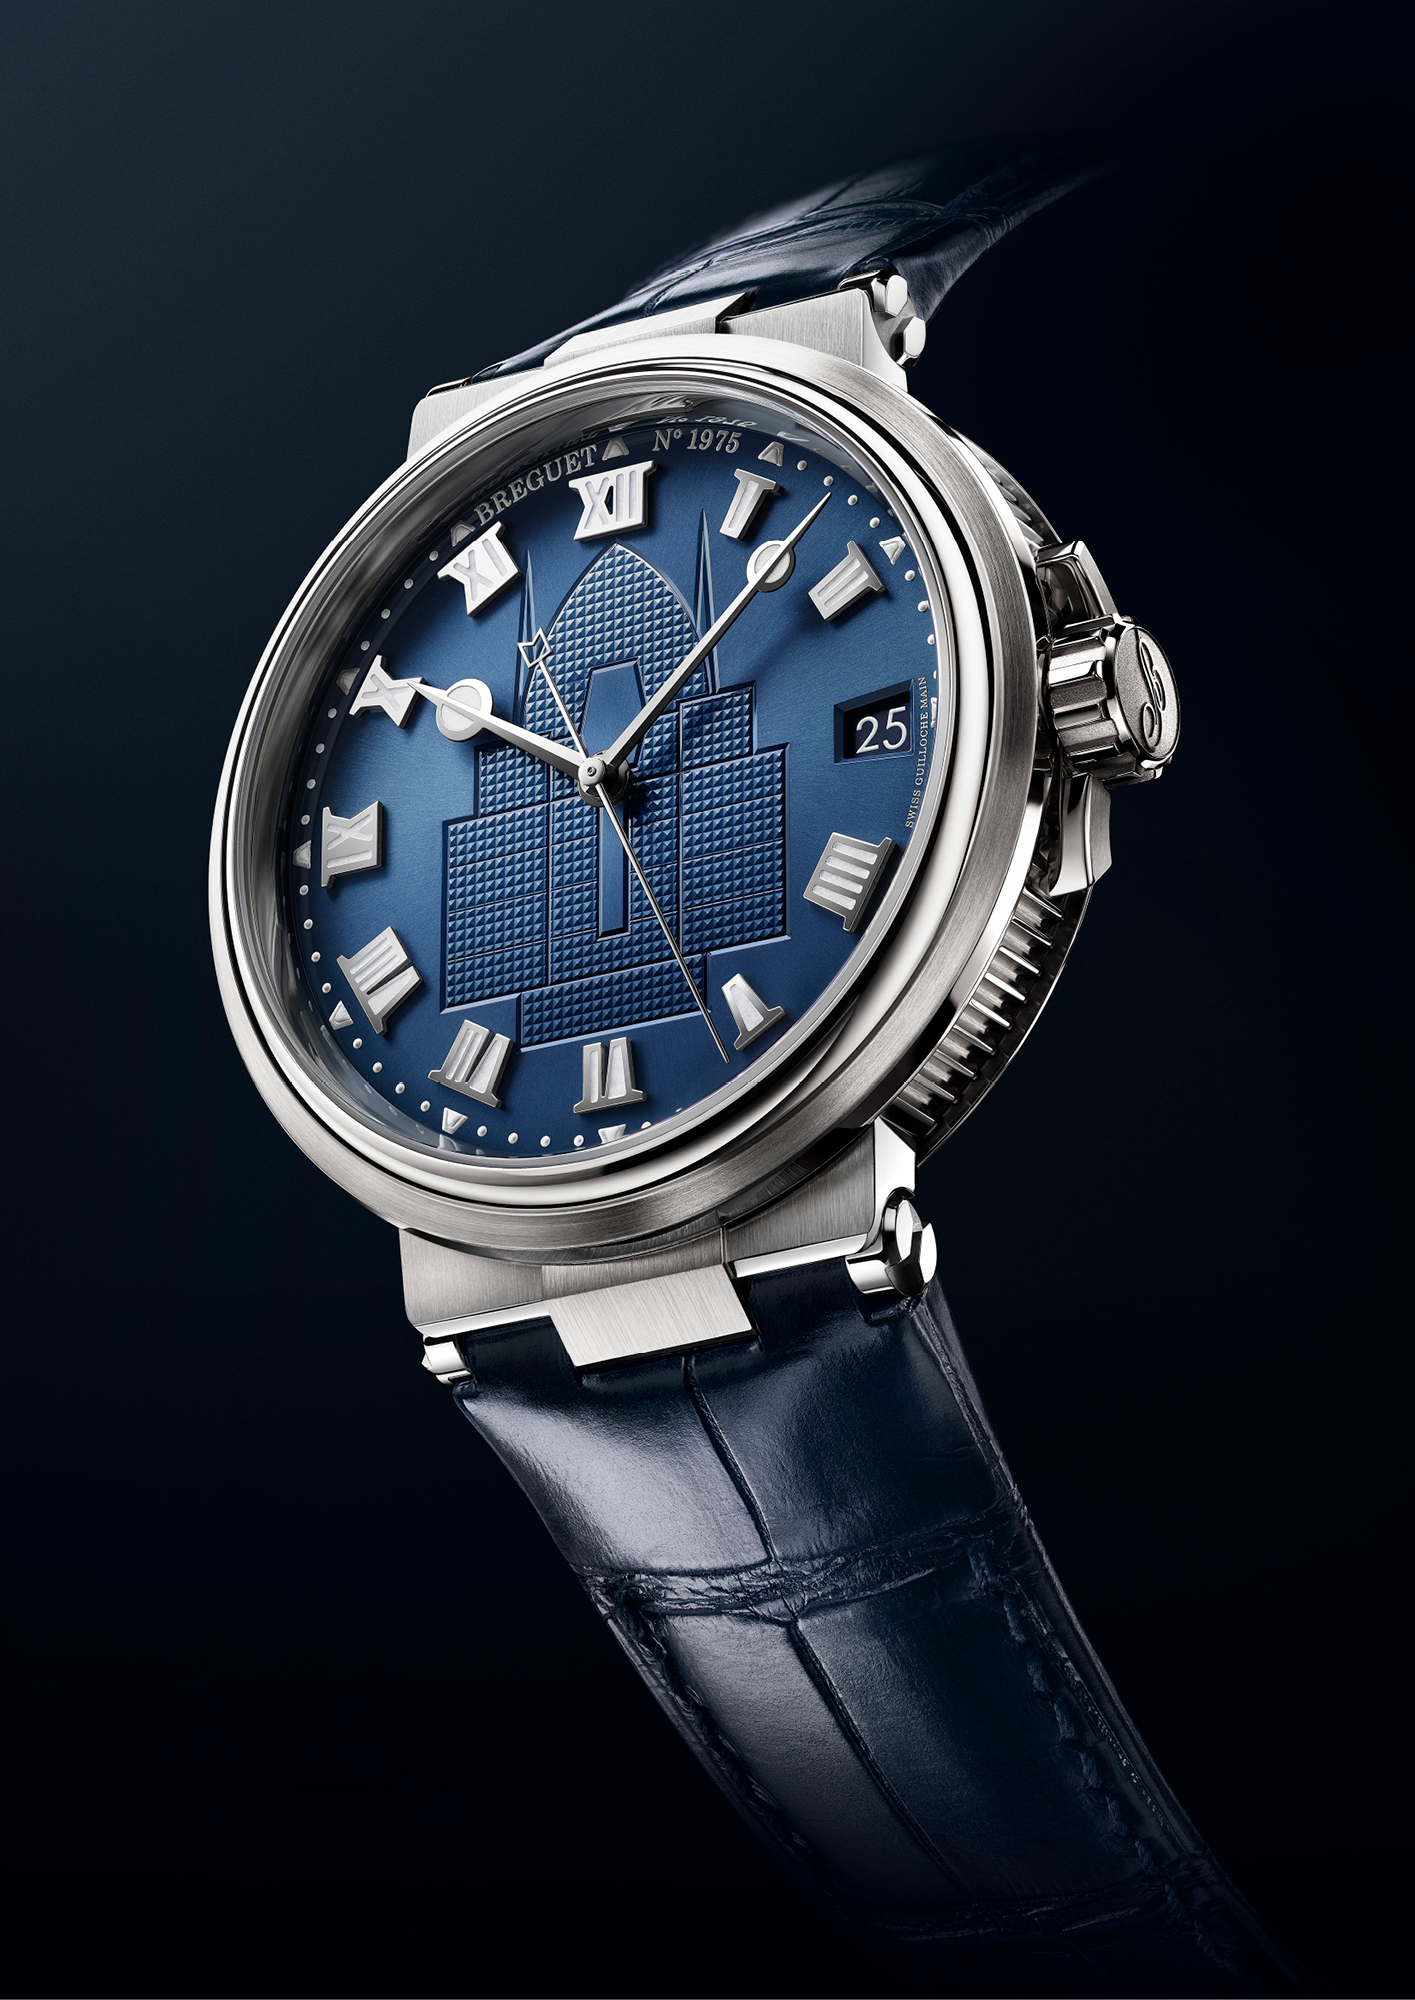 The Breguet Marine 5517 Race For Water timepiece